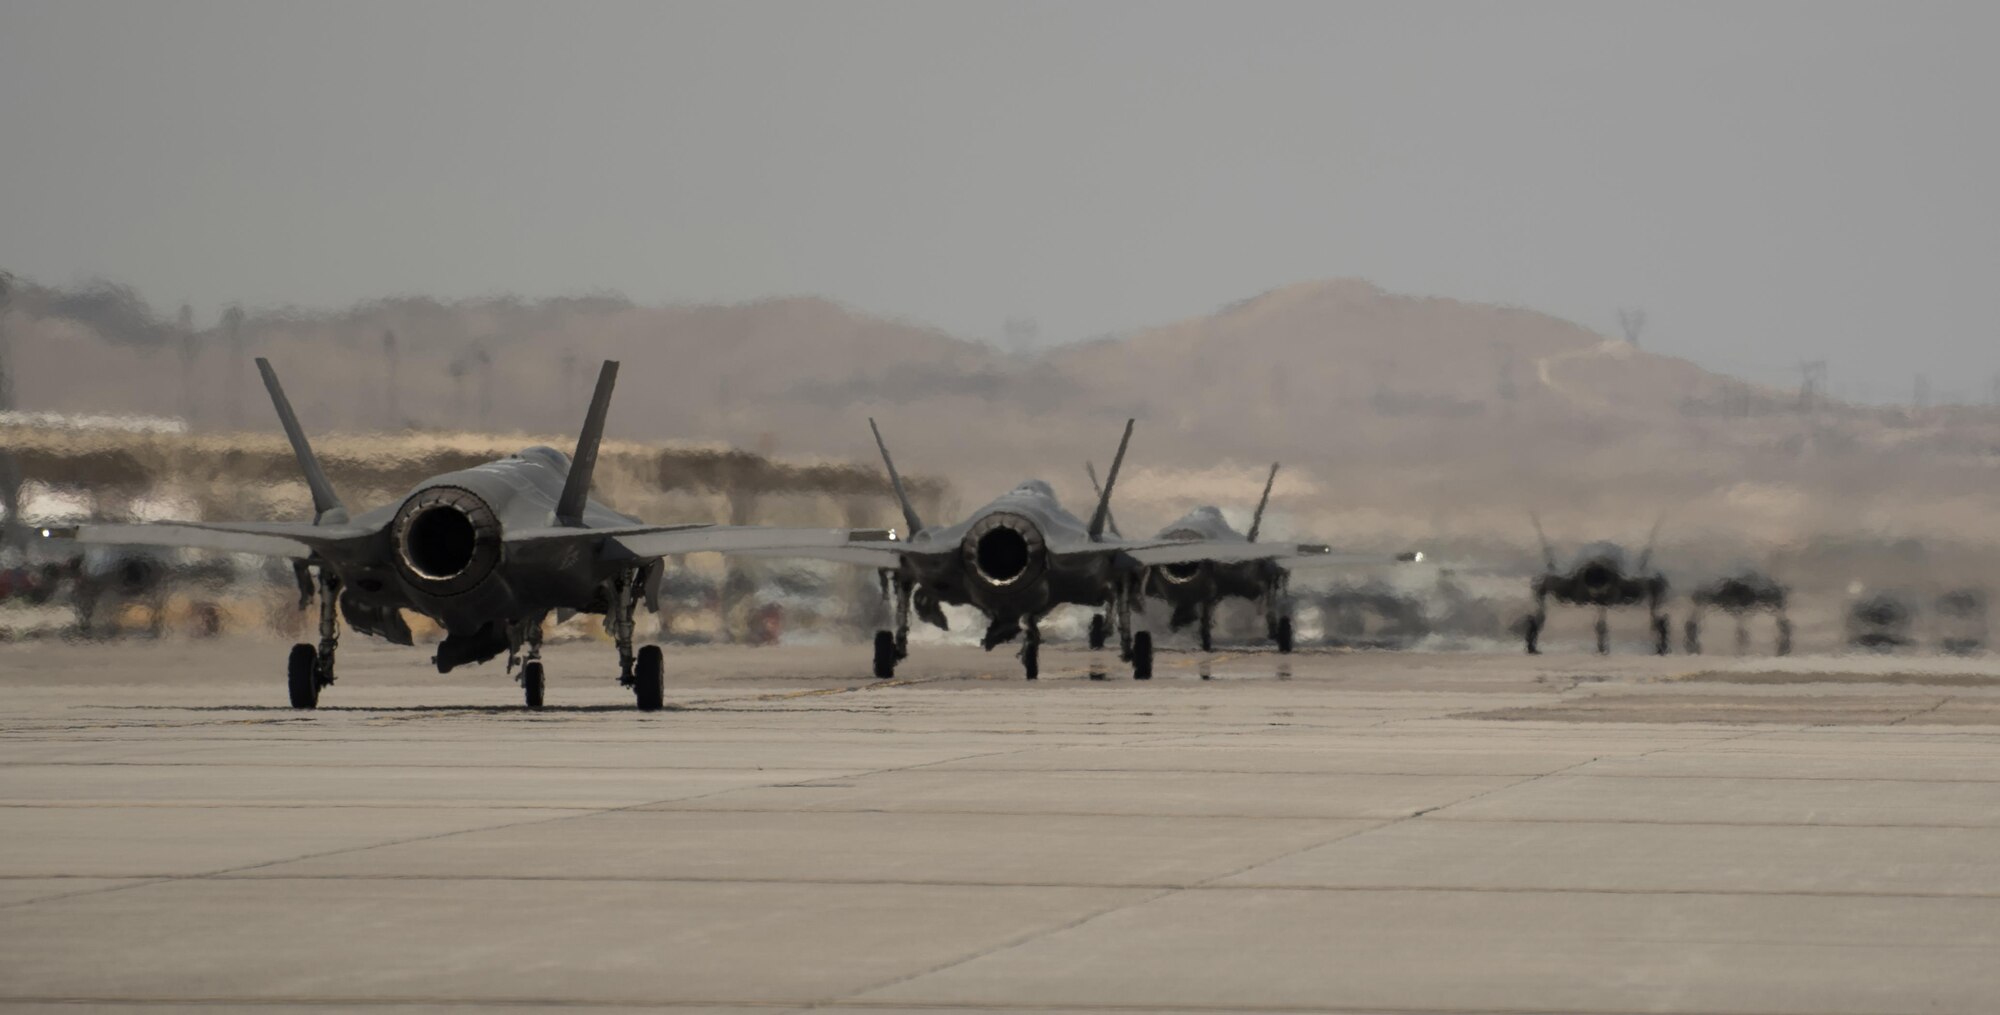 U.S. Air Force F-35A and Marine Corps F-35B Lightning IIs taxi before taking off July 18, 2017, at Nellis Air Force Base, Nev. The 33rd Fighter Wing and Marine Attack Squadron 221 from Yuma, Ariz., participated in the first combat exercise with Air Force F-35As and Marine Corps F-35Bs operating simultaneously during Red Flag 17-3. The large scale exercise, which was developed to provide pilots with critical experience in combat situations, enabled F-35 pilots to plan and train using the same tactics, techniques and procedures. (U.S. Air Force photo by Staff Sgt. Peter Thompson)